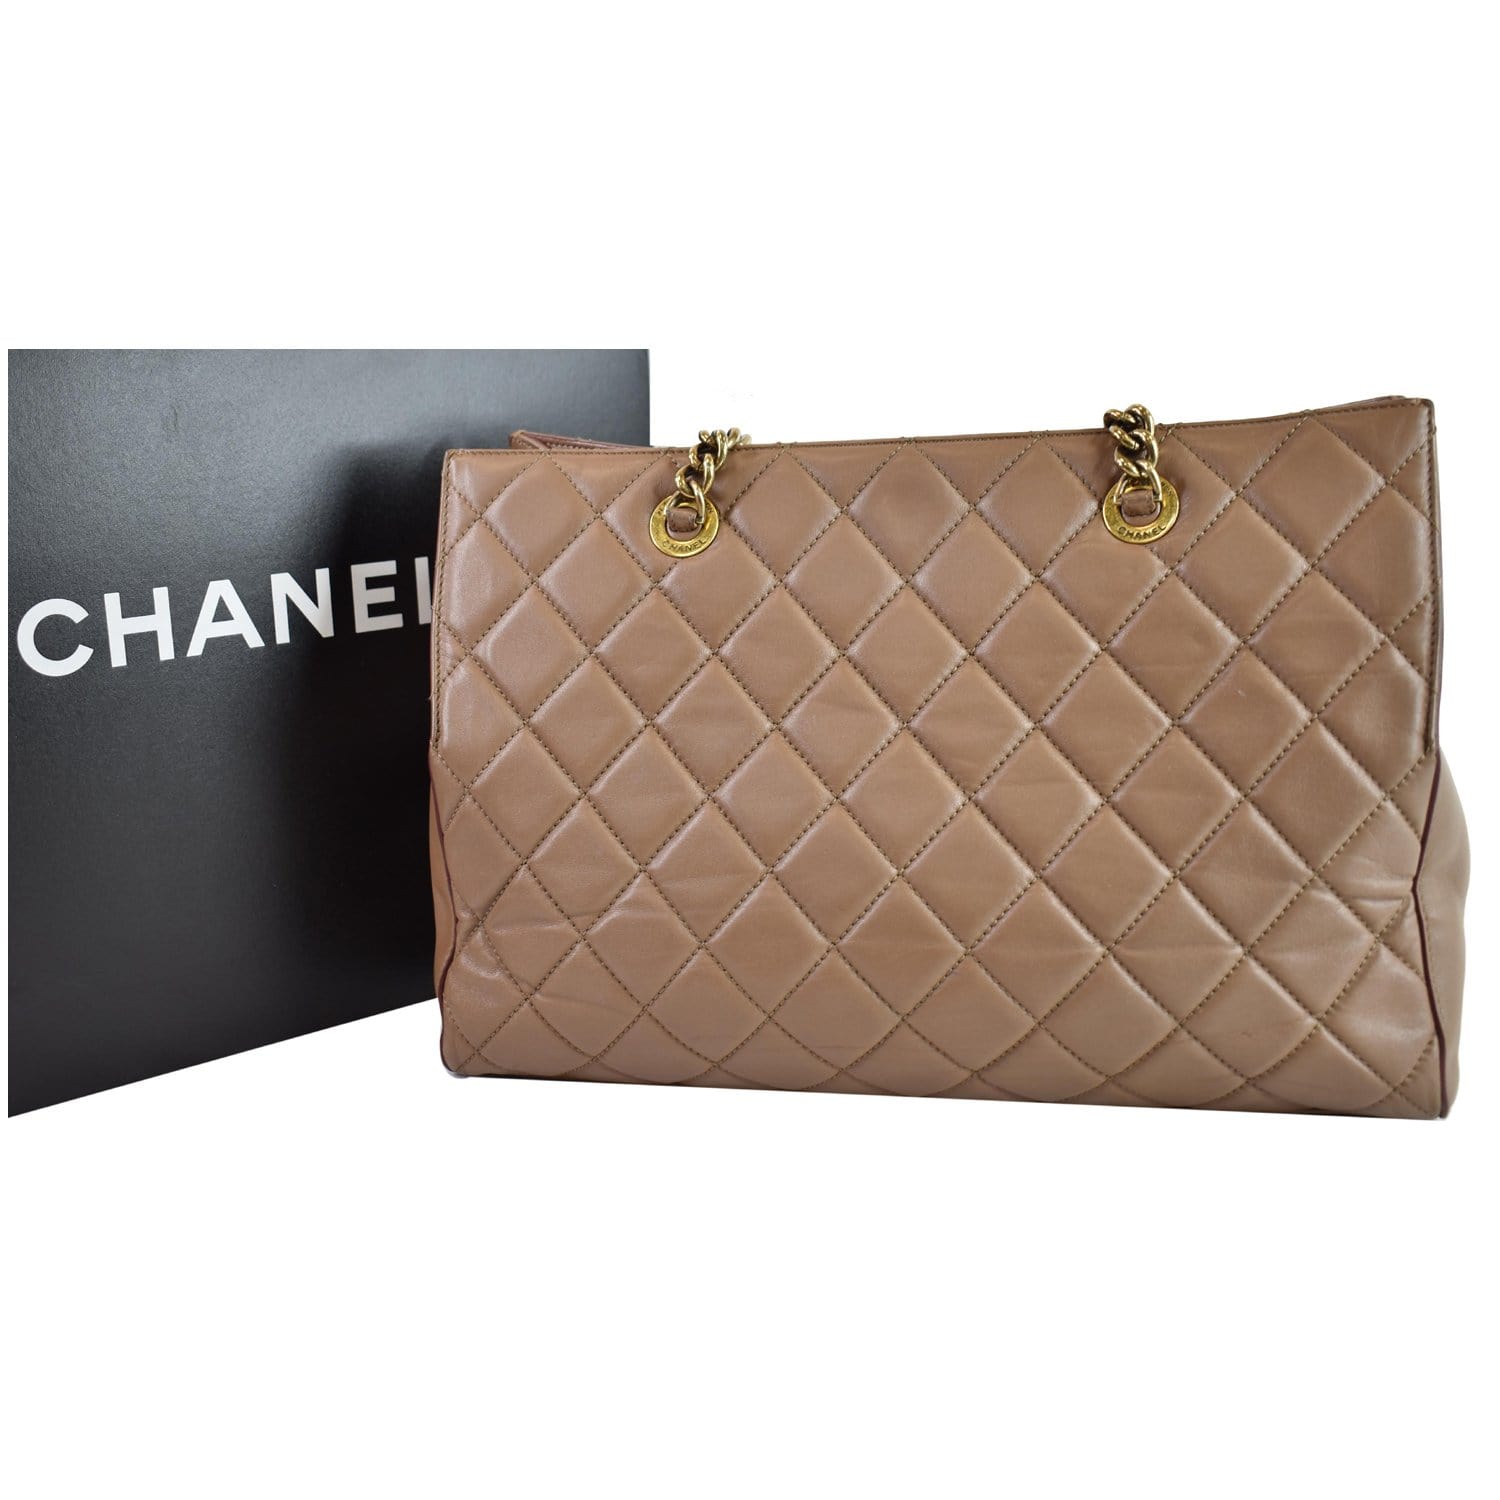 CHANEL Quilted CC SHW 2.55 Chain Shoulder Bag Caviar Leather Dark Brown